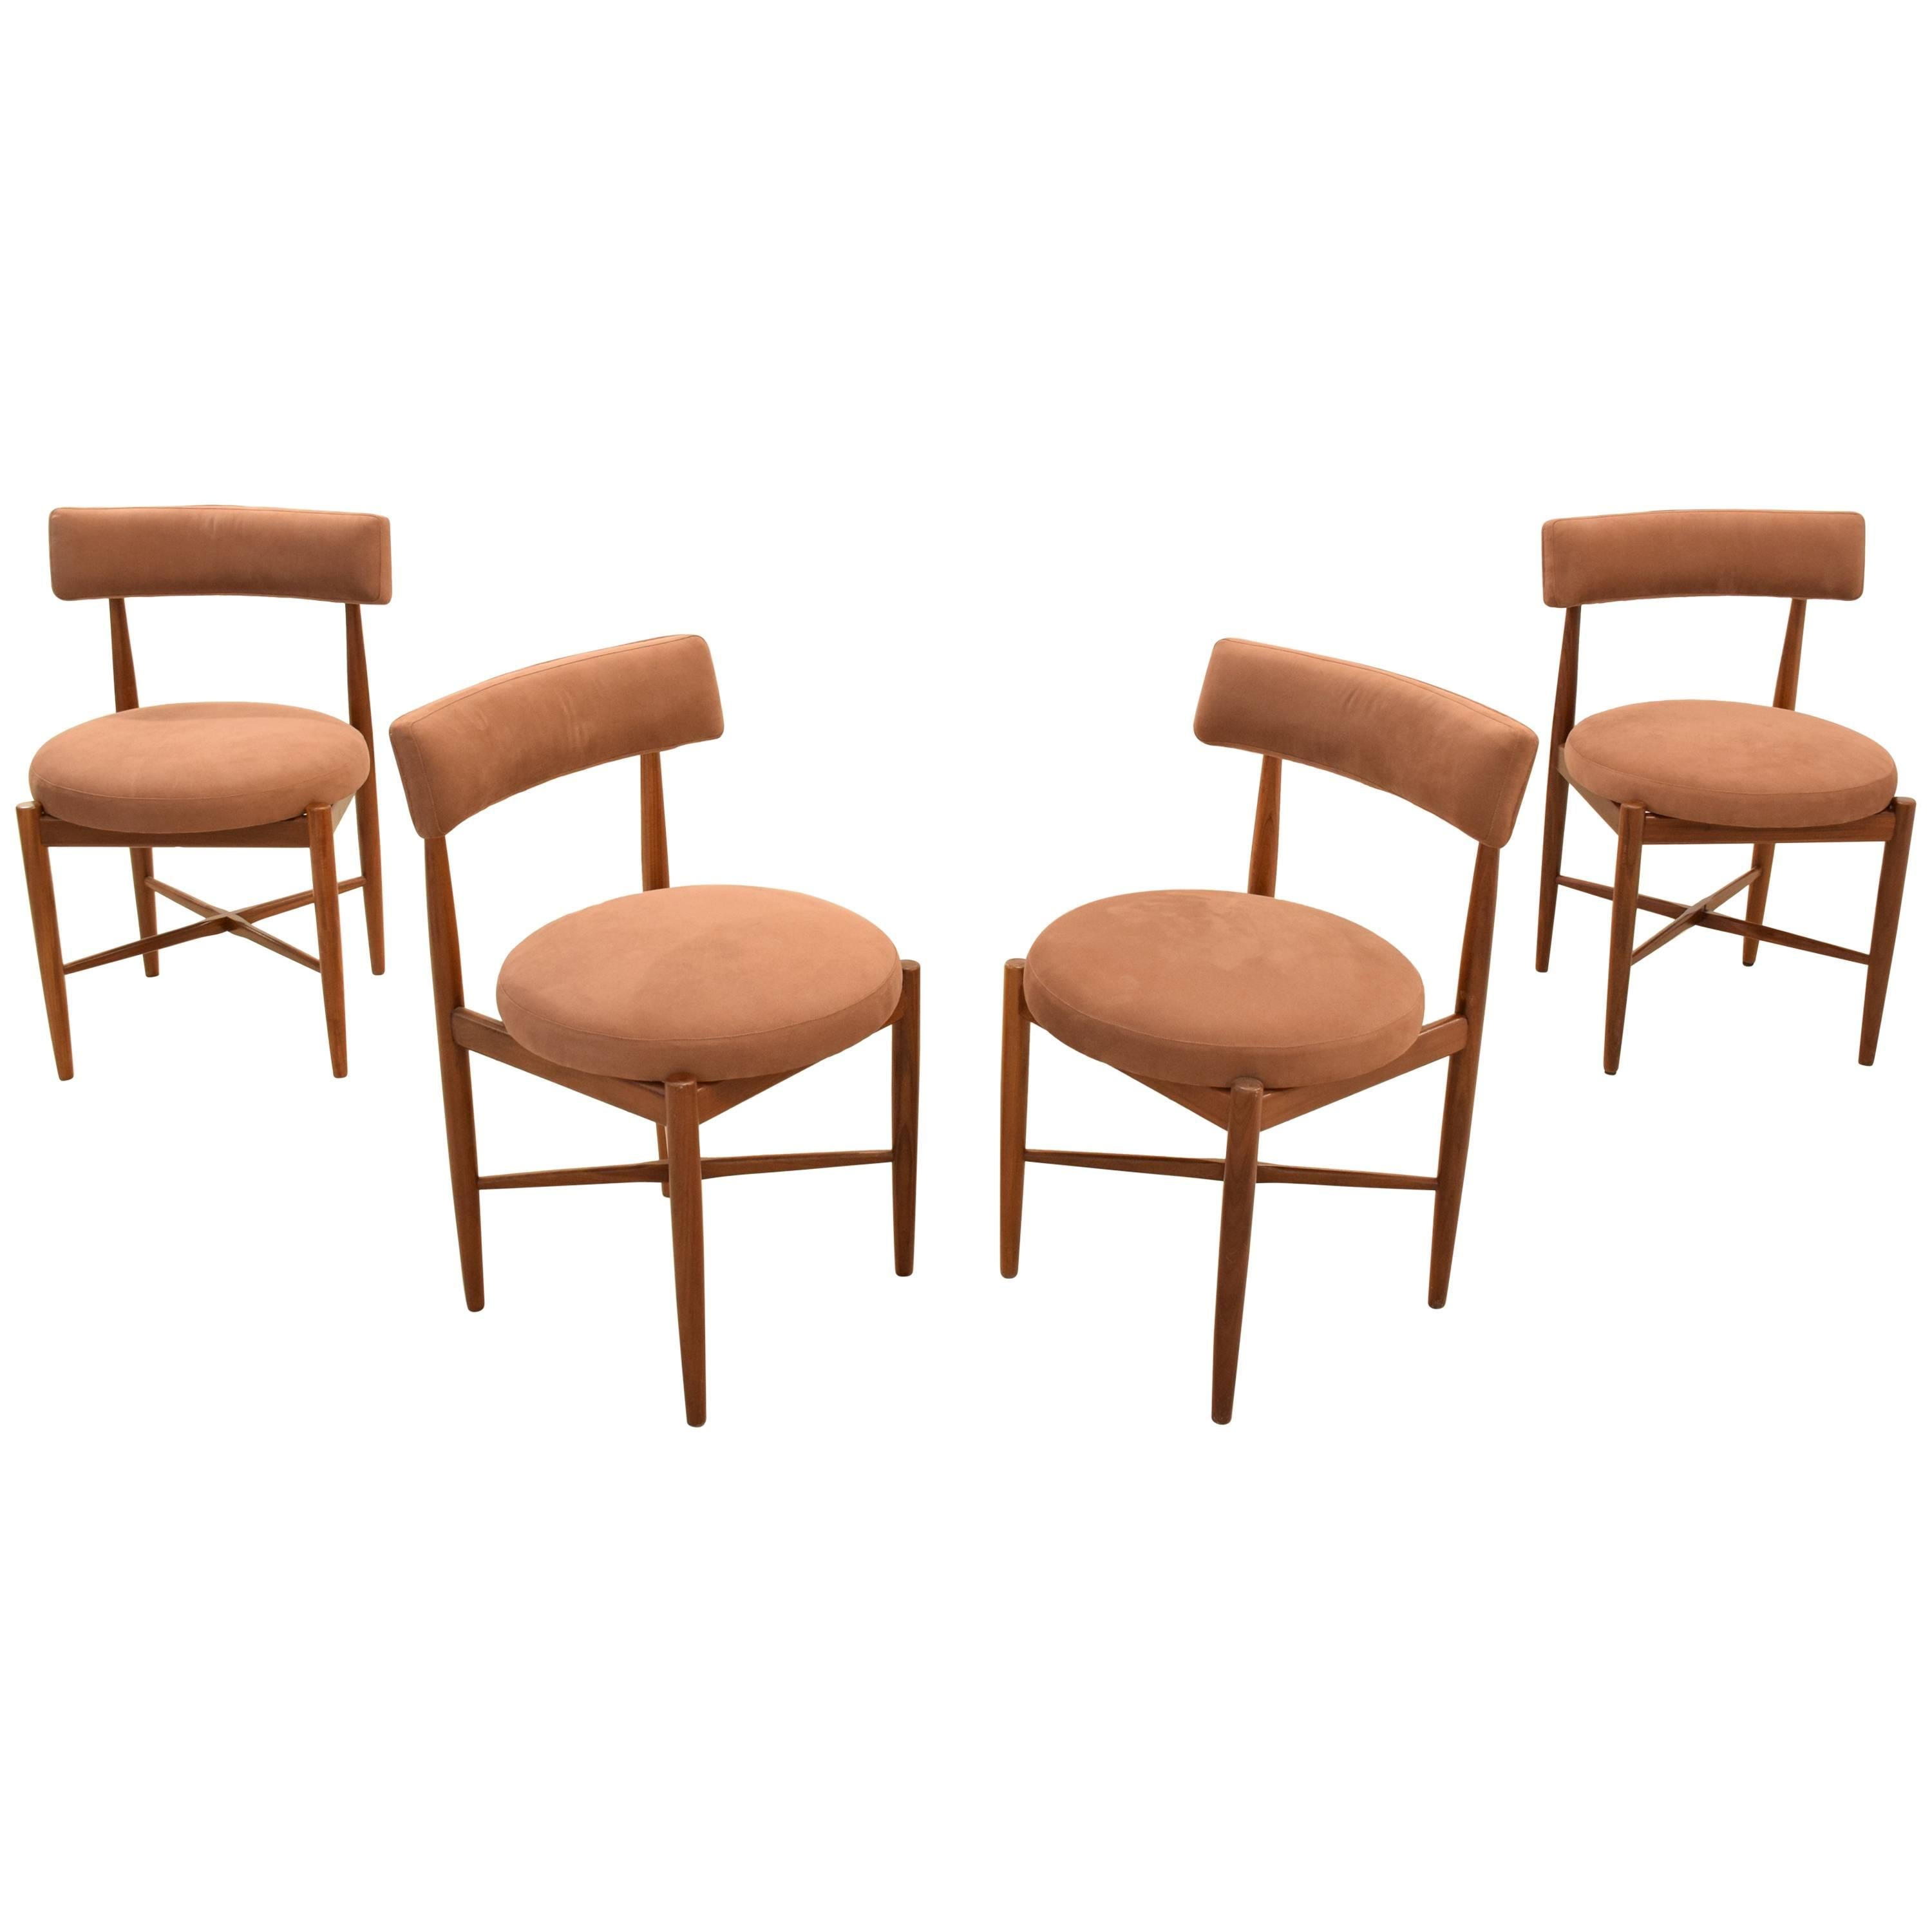 Mid-Century Teak Dining Chairs by G-Plan